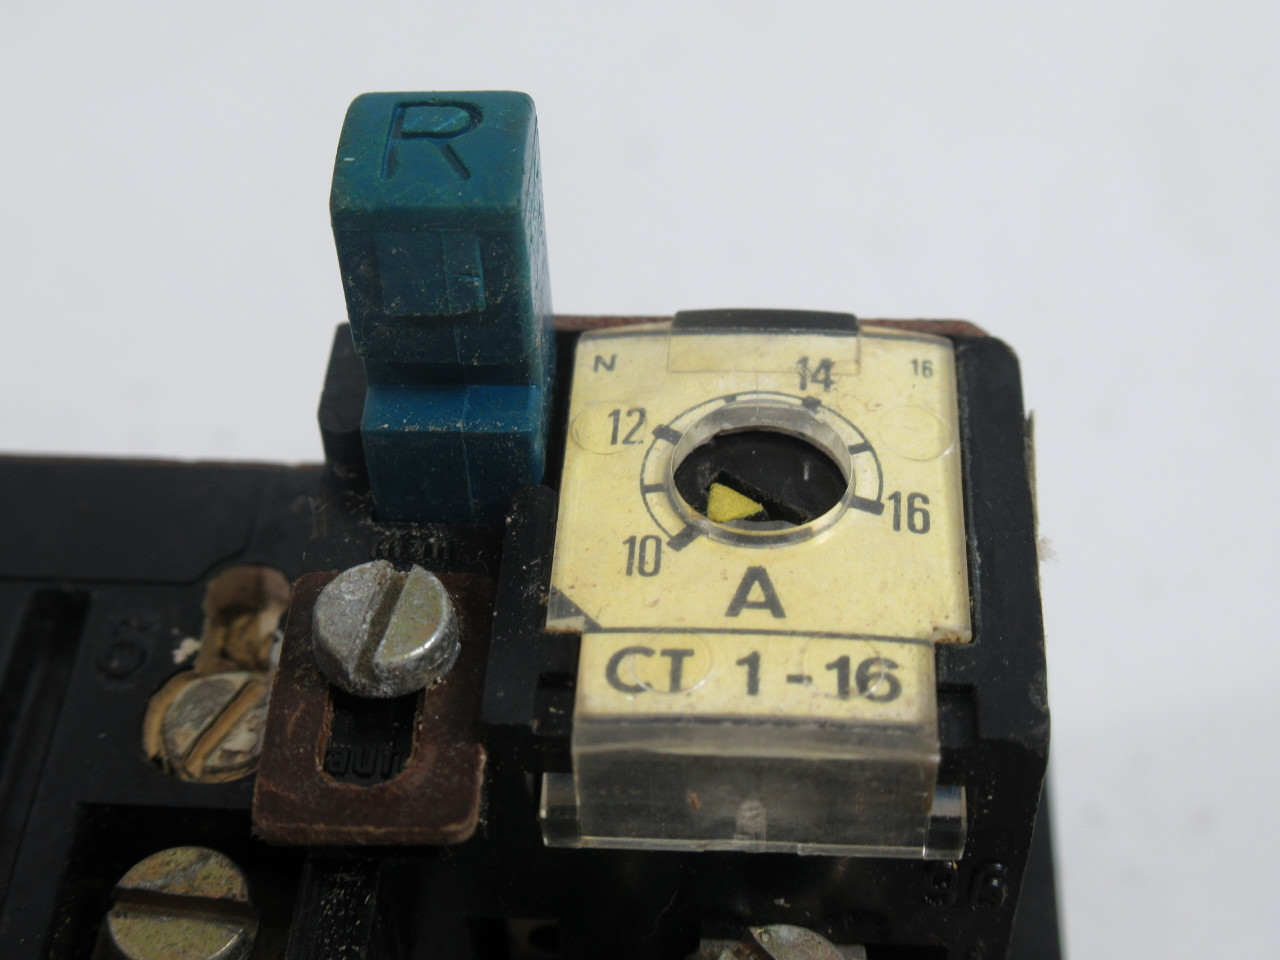 Sprecher + Schuh CT1-16 Overload Relay 10-16A 600V USED